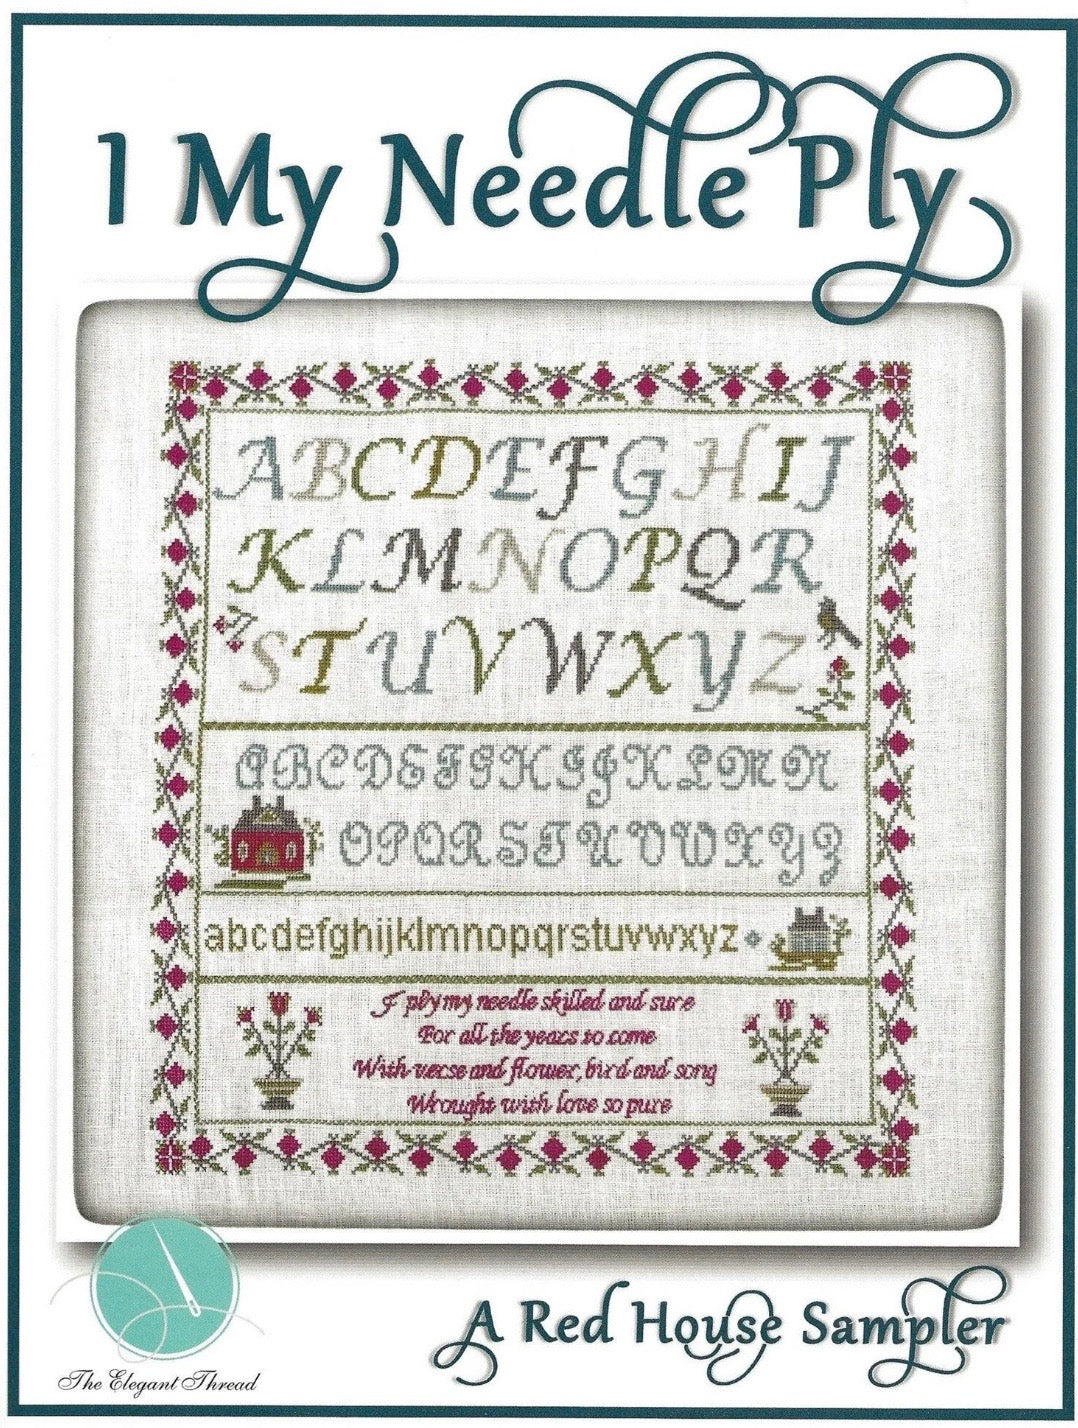 I My Needle Ply - A Red House Sampler by The Elegant Thread